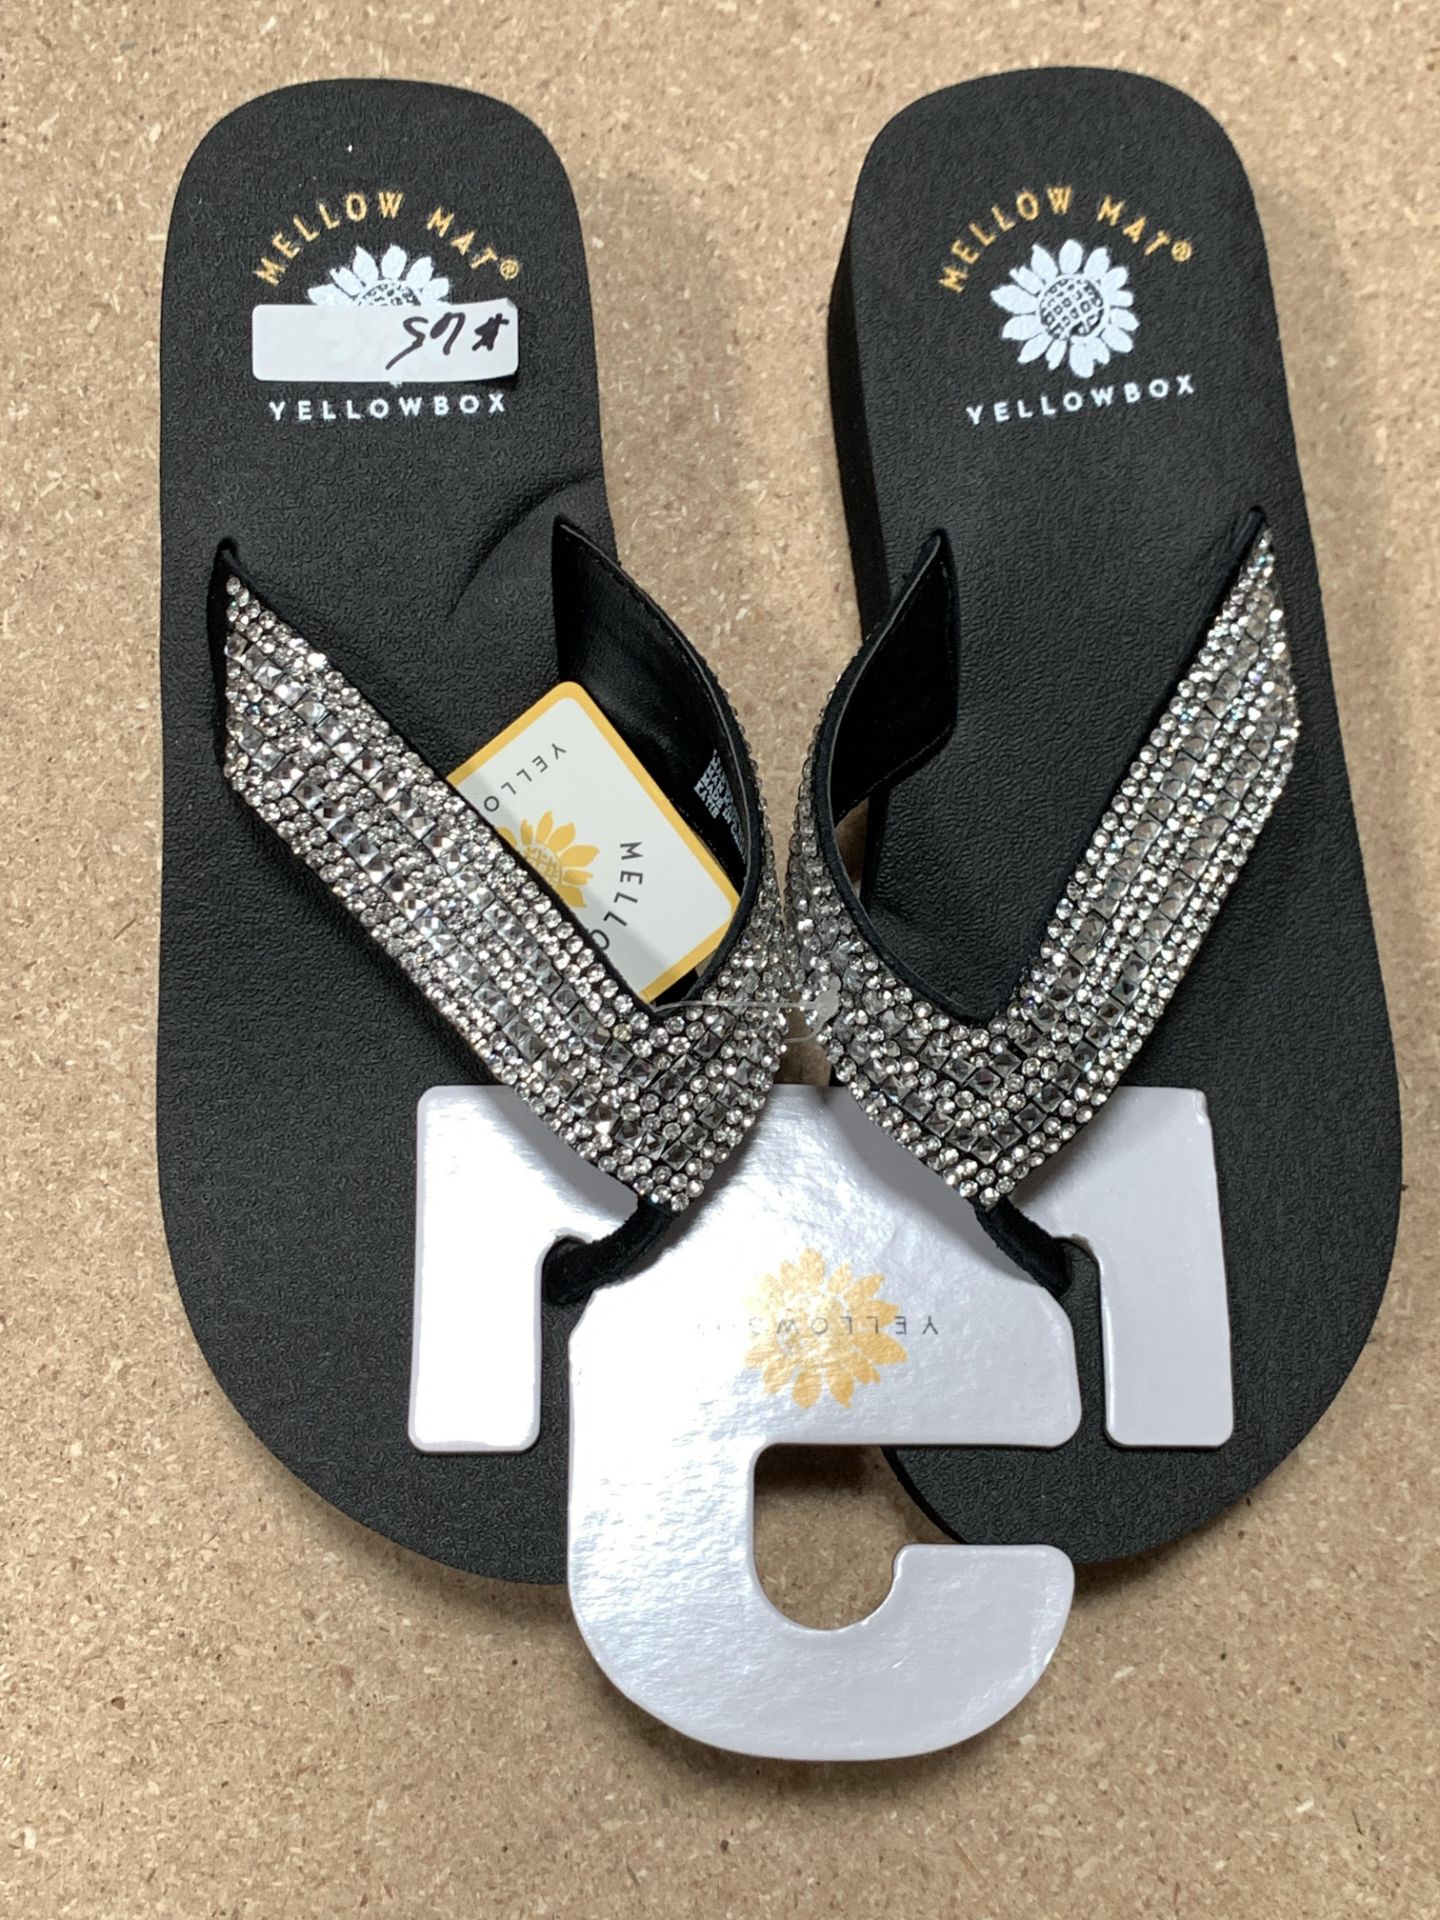 8 Pairs Yellow Box Flip Flop Sandals, New w. Tags, Various Styles and Sizes (Retail $454) - Image 3 of 7